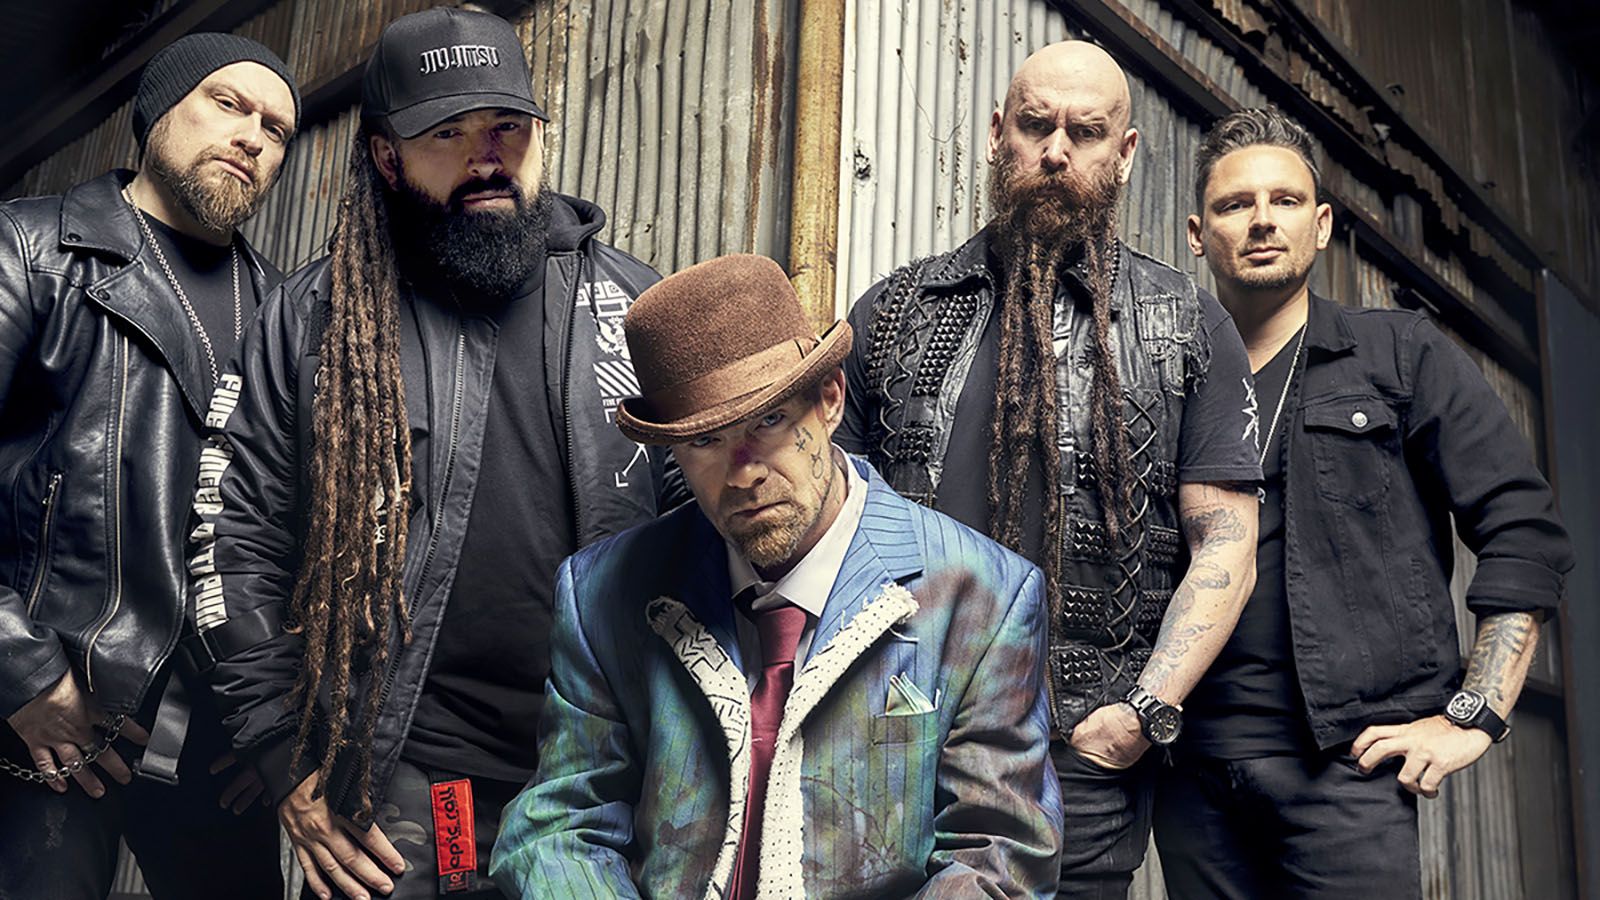 Five Finger Death Punch will be at Memorial Coliseum on Nov. 10.